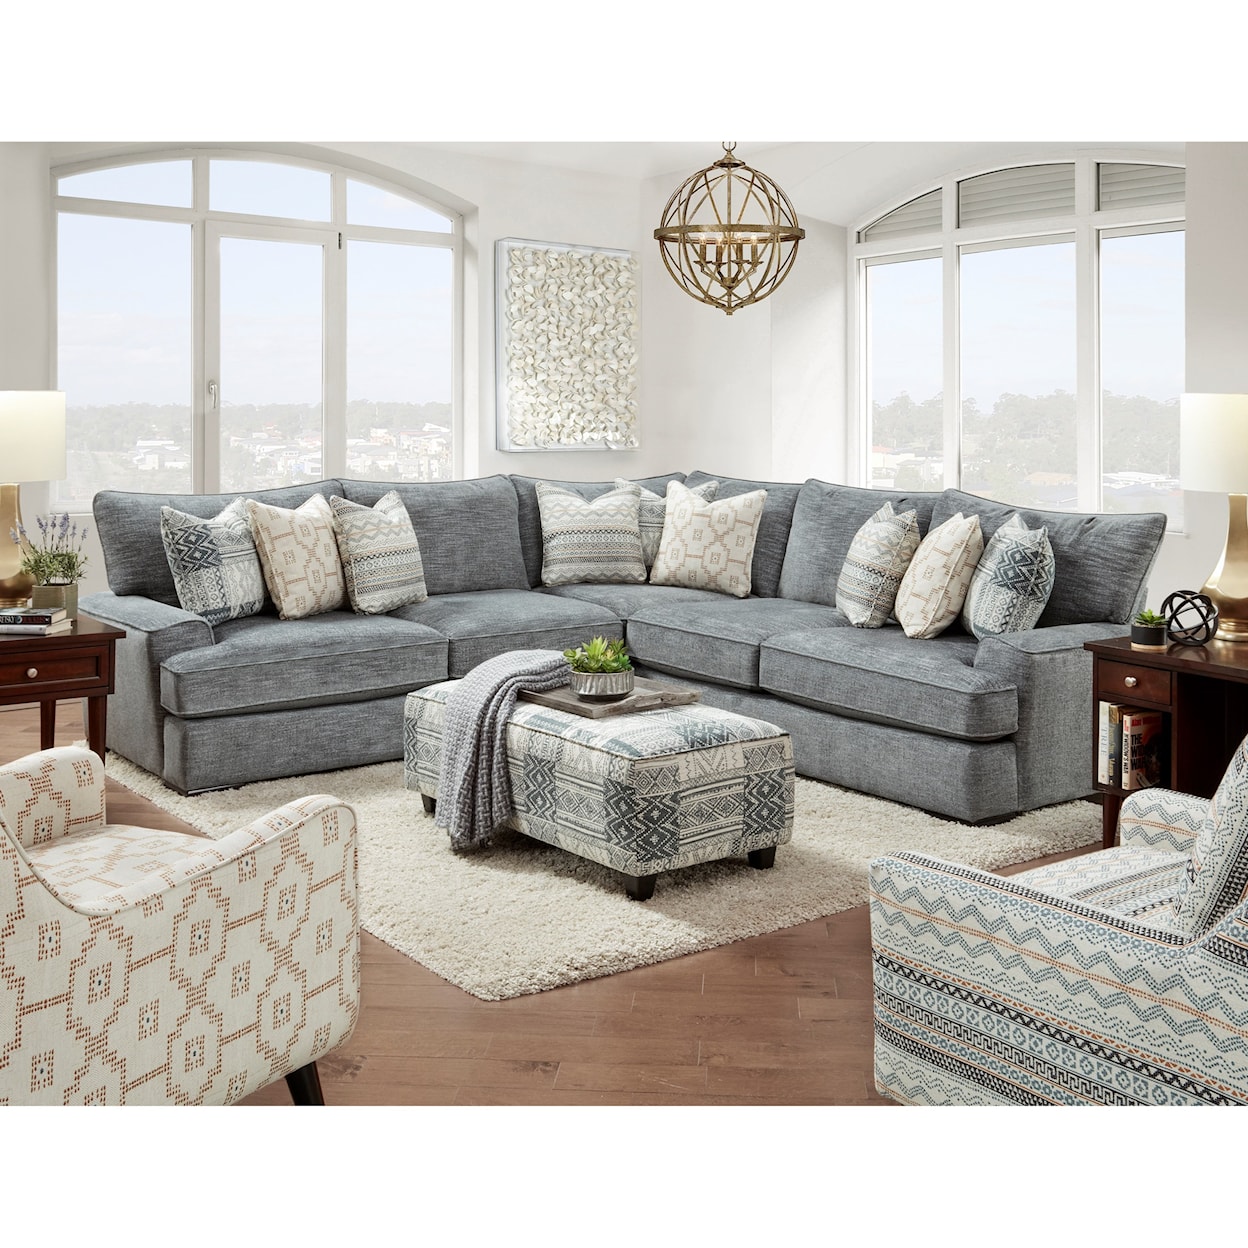 Fusion Furniture 2000 HANDWOVEN SLATE RIVERDALE L-Shaped Sectional